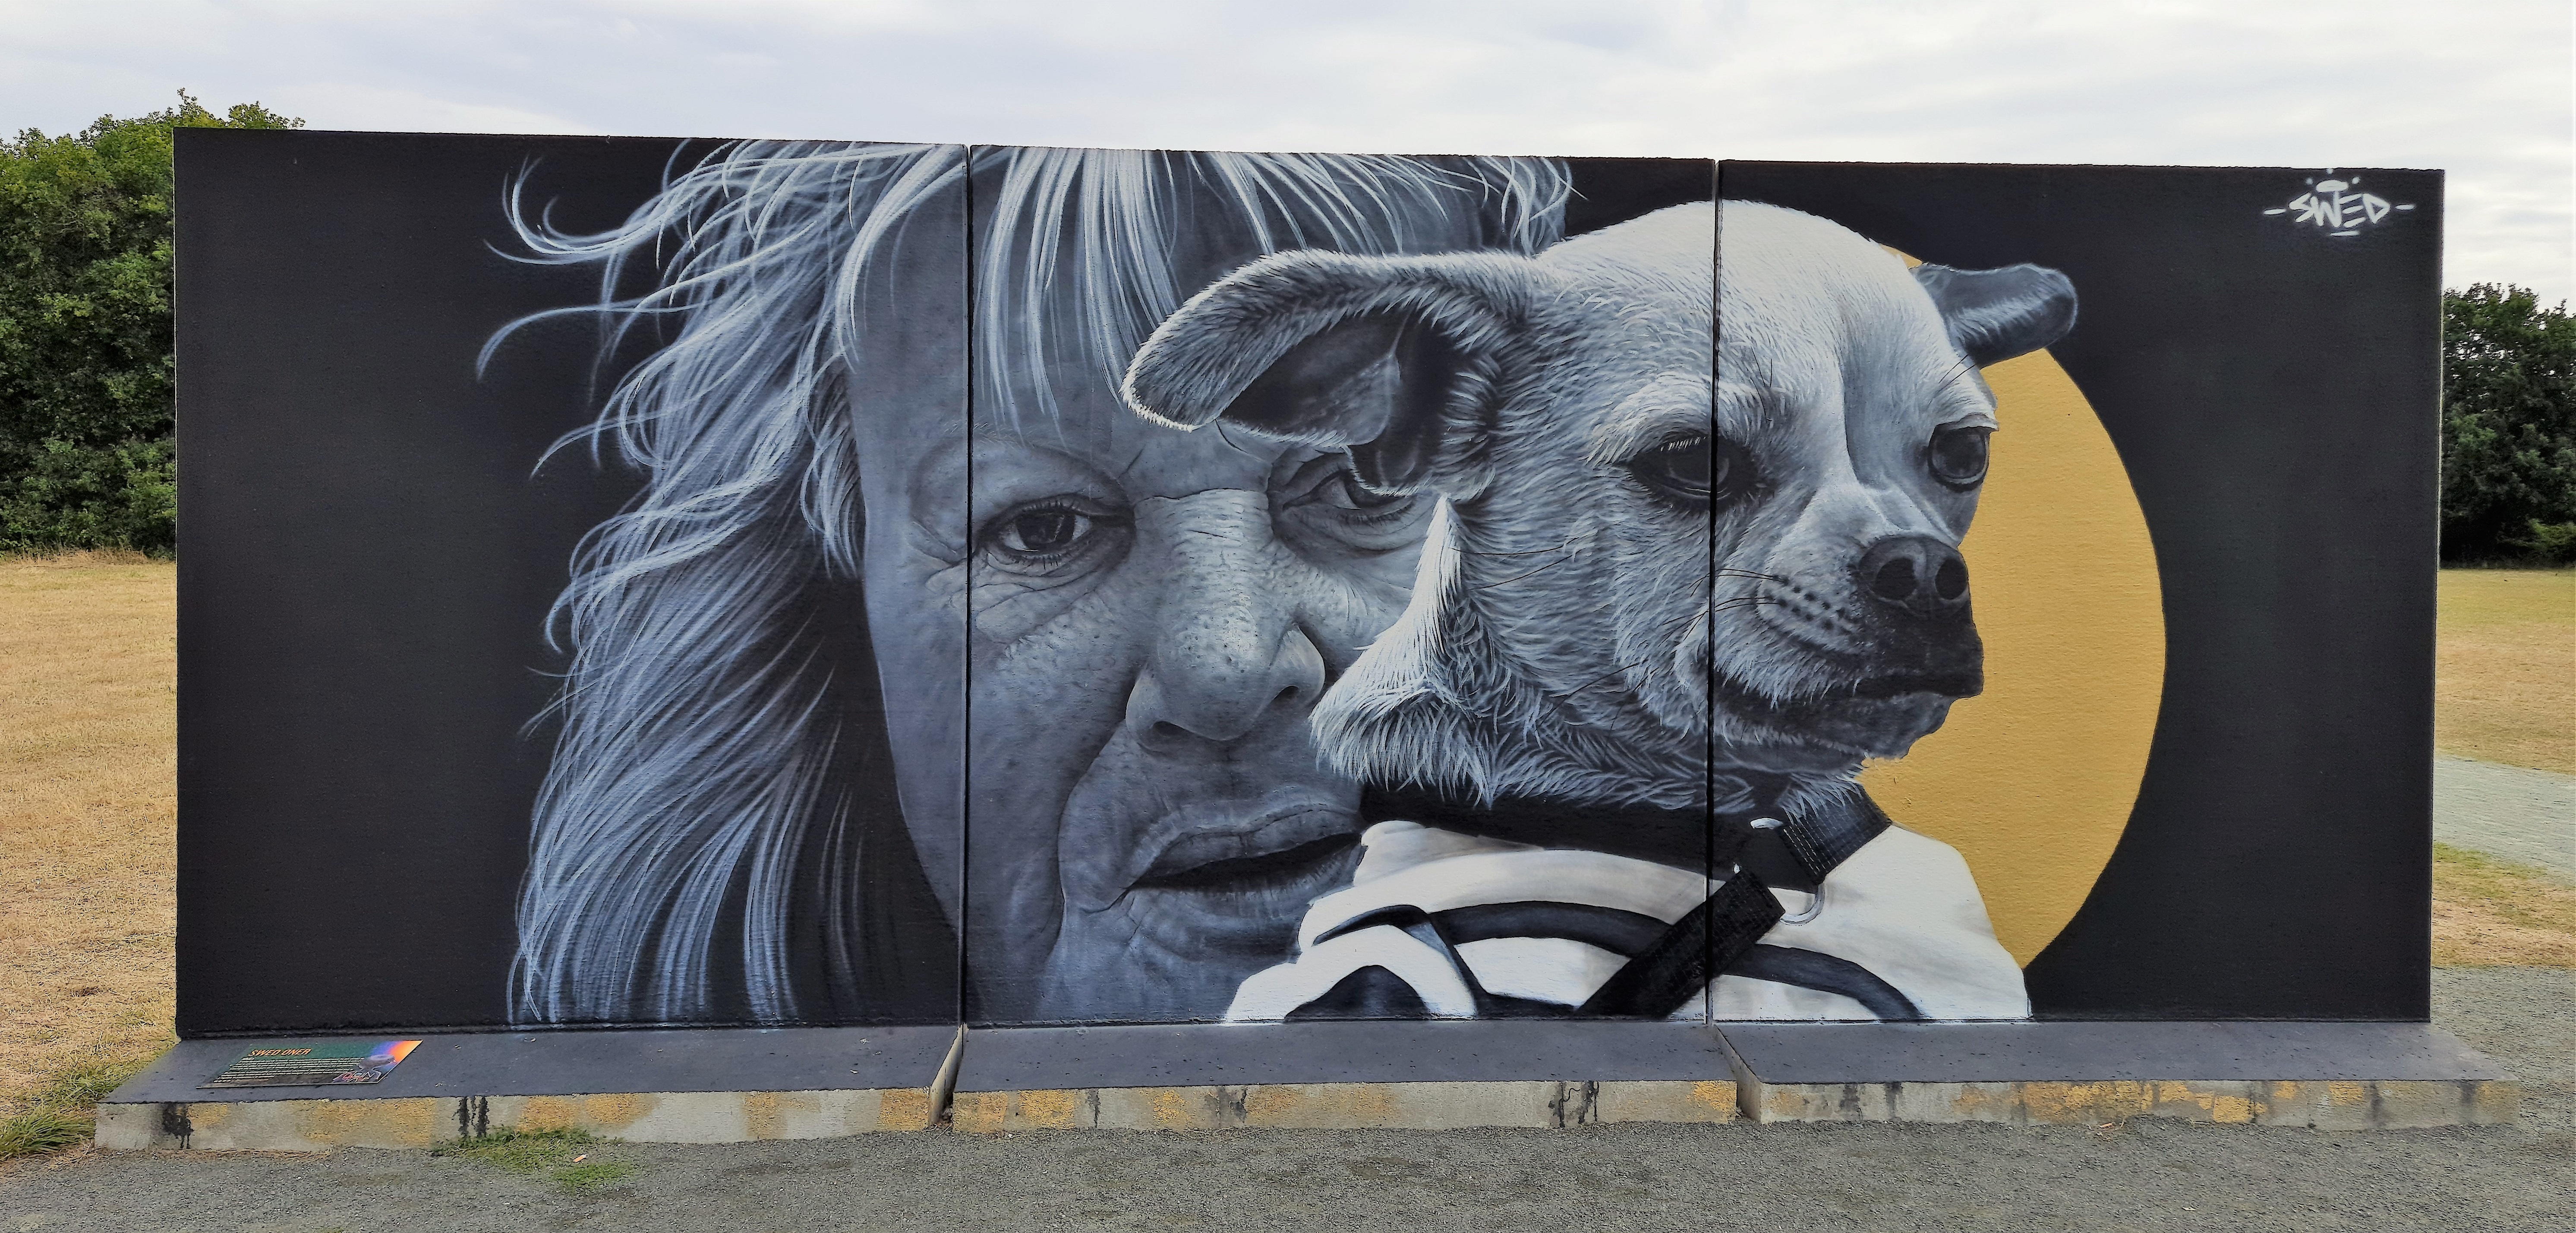 Graffiti 6951  by the artist SWED ONER captured by Mephisroth in Le Mans France